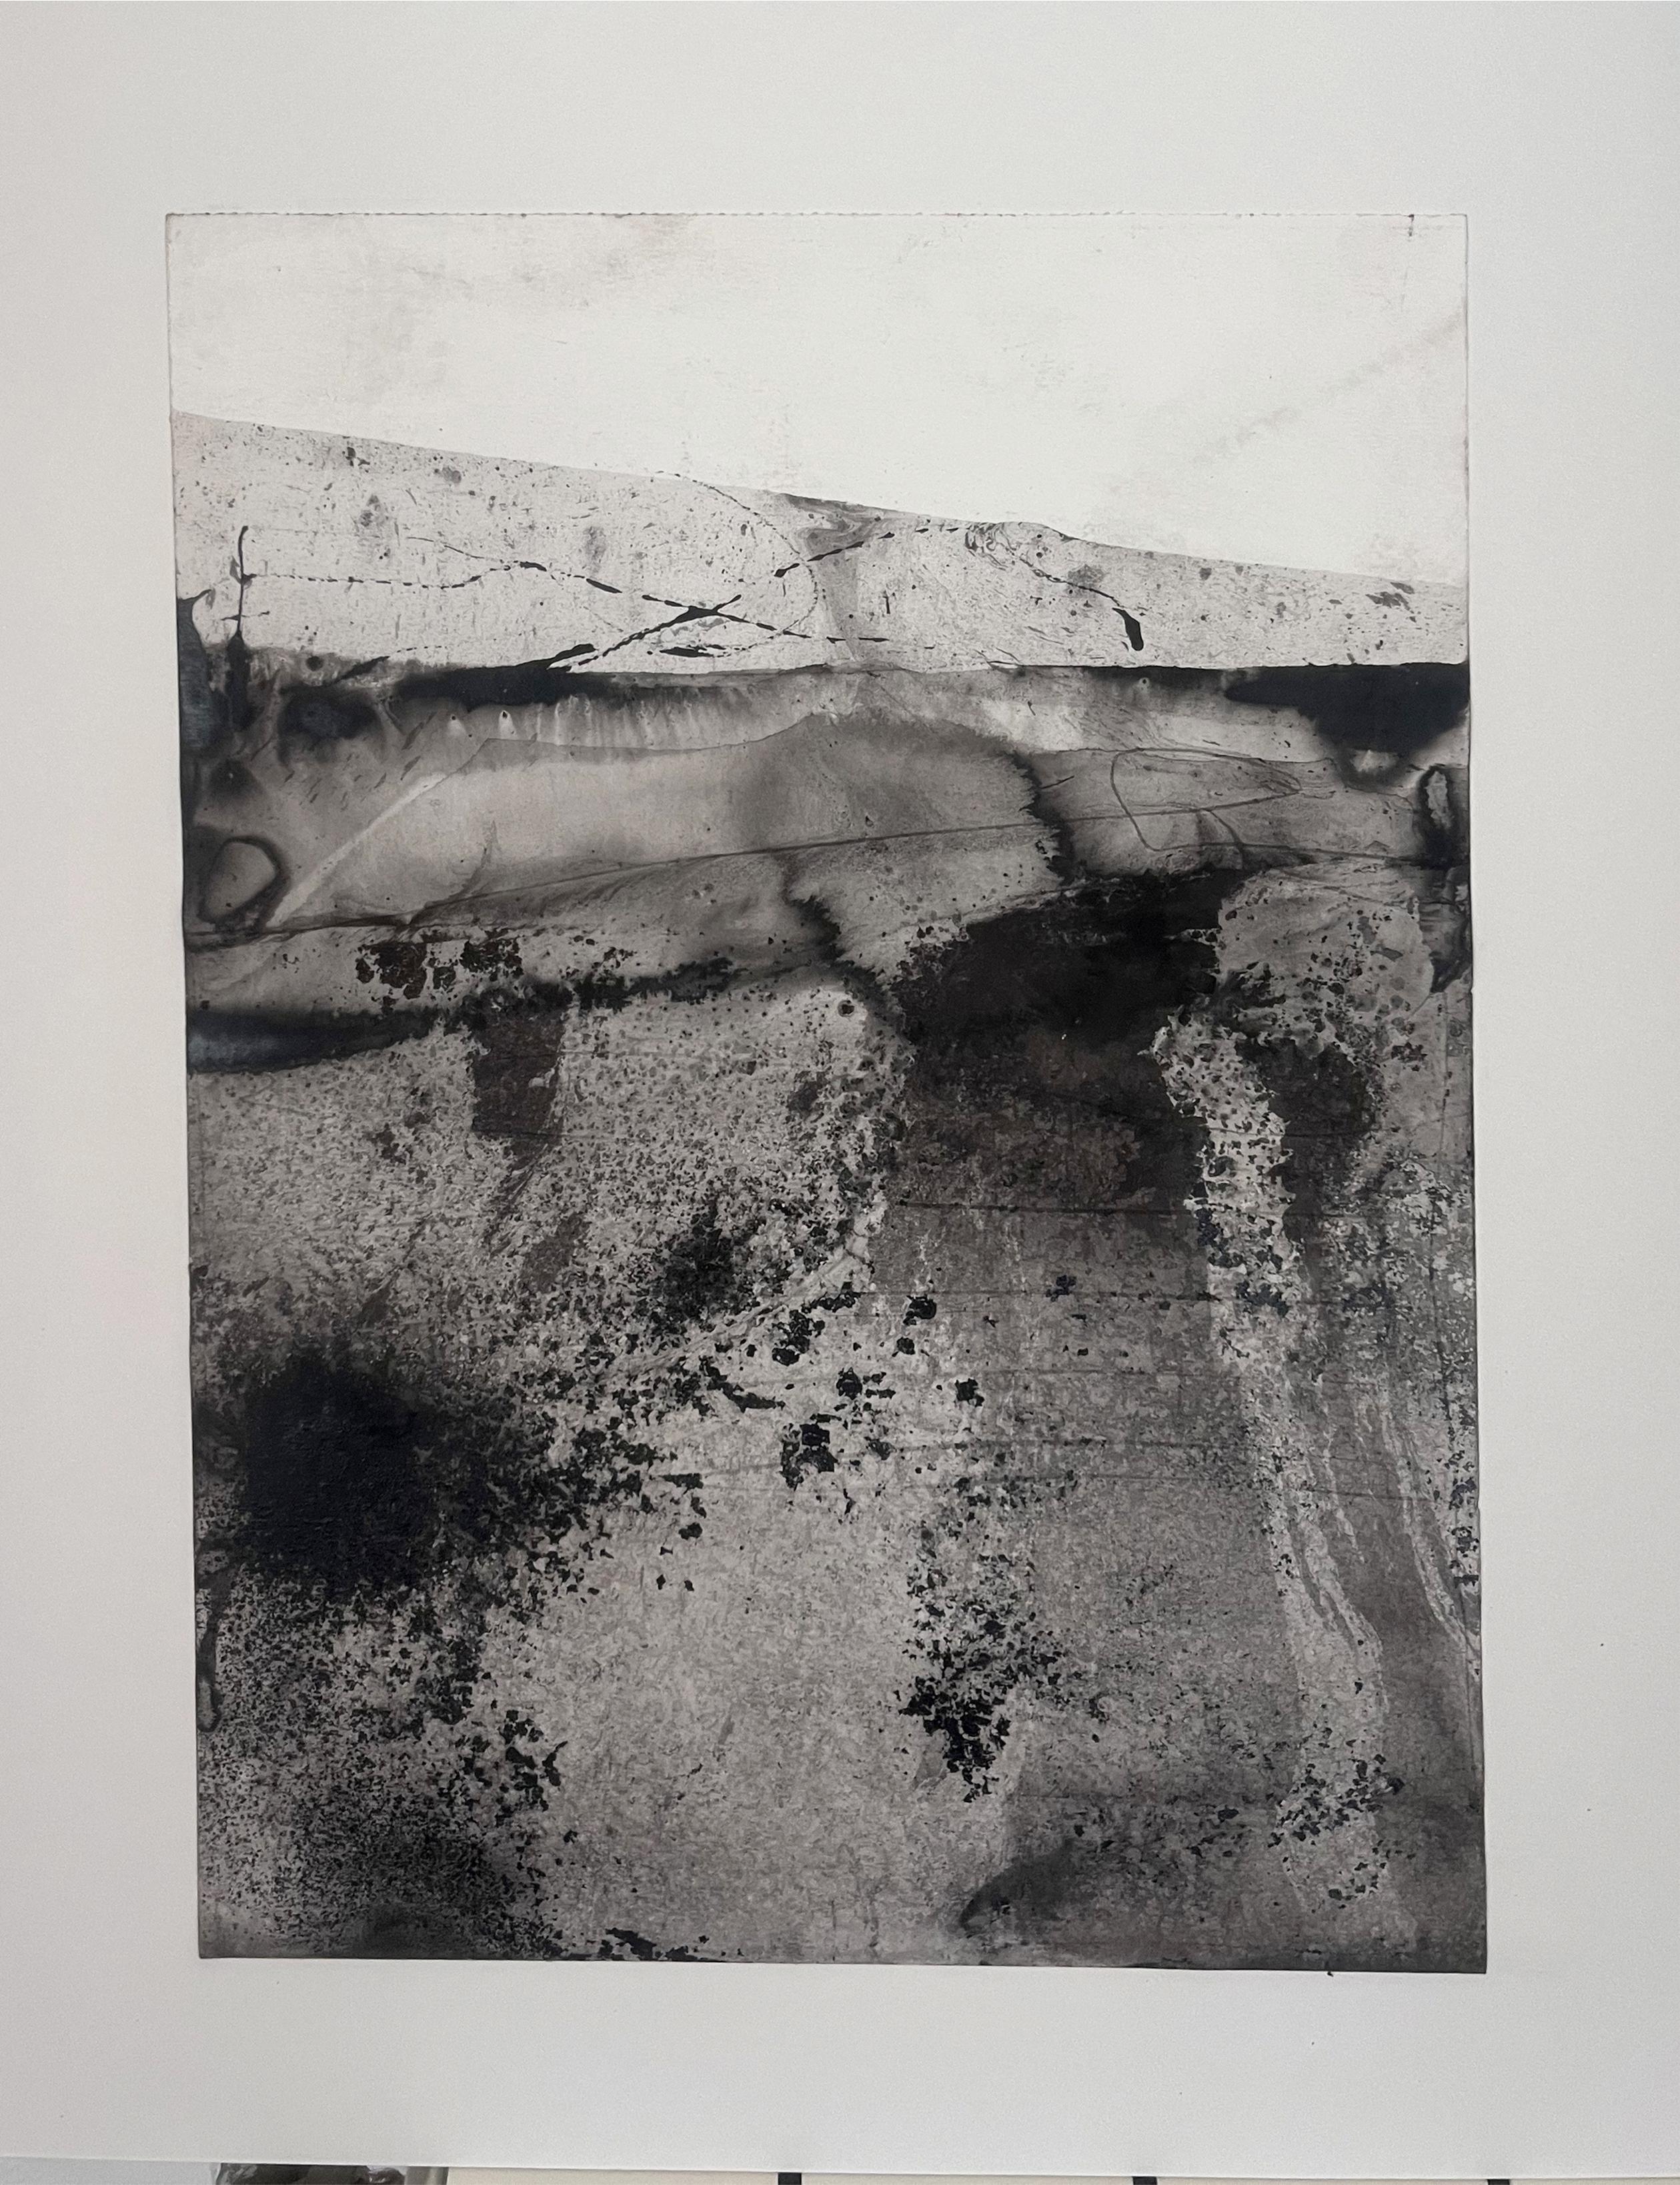 
Landscape B/W
charcoal on paper (Canson paper 300 gr)
30x 42 cm
framed SIZE
40x50 cm
the drawing comes with a passepartout and a rigid support ready to be hung

this painting is published in the personal exhibition catalogue
